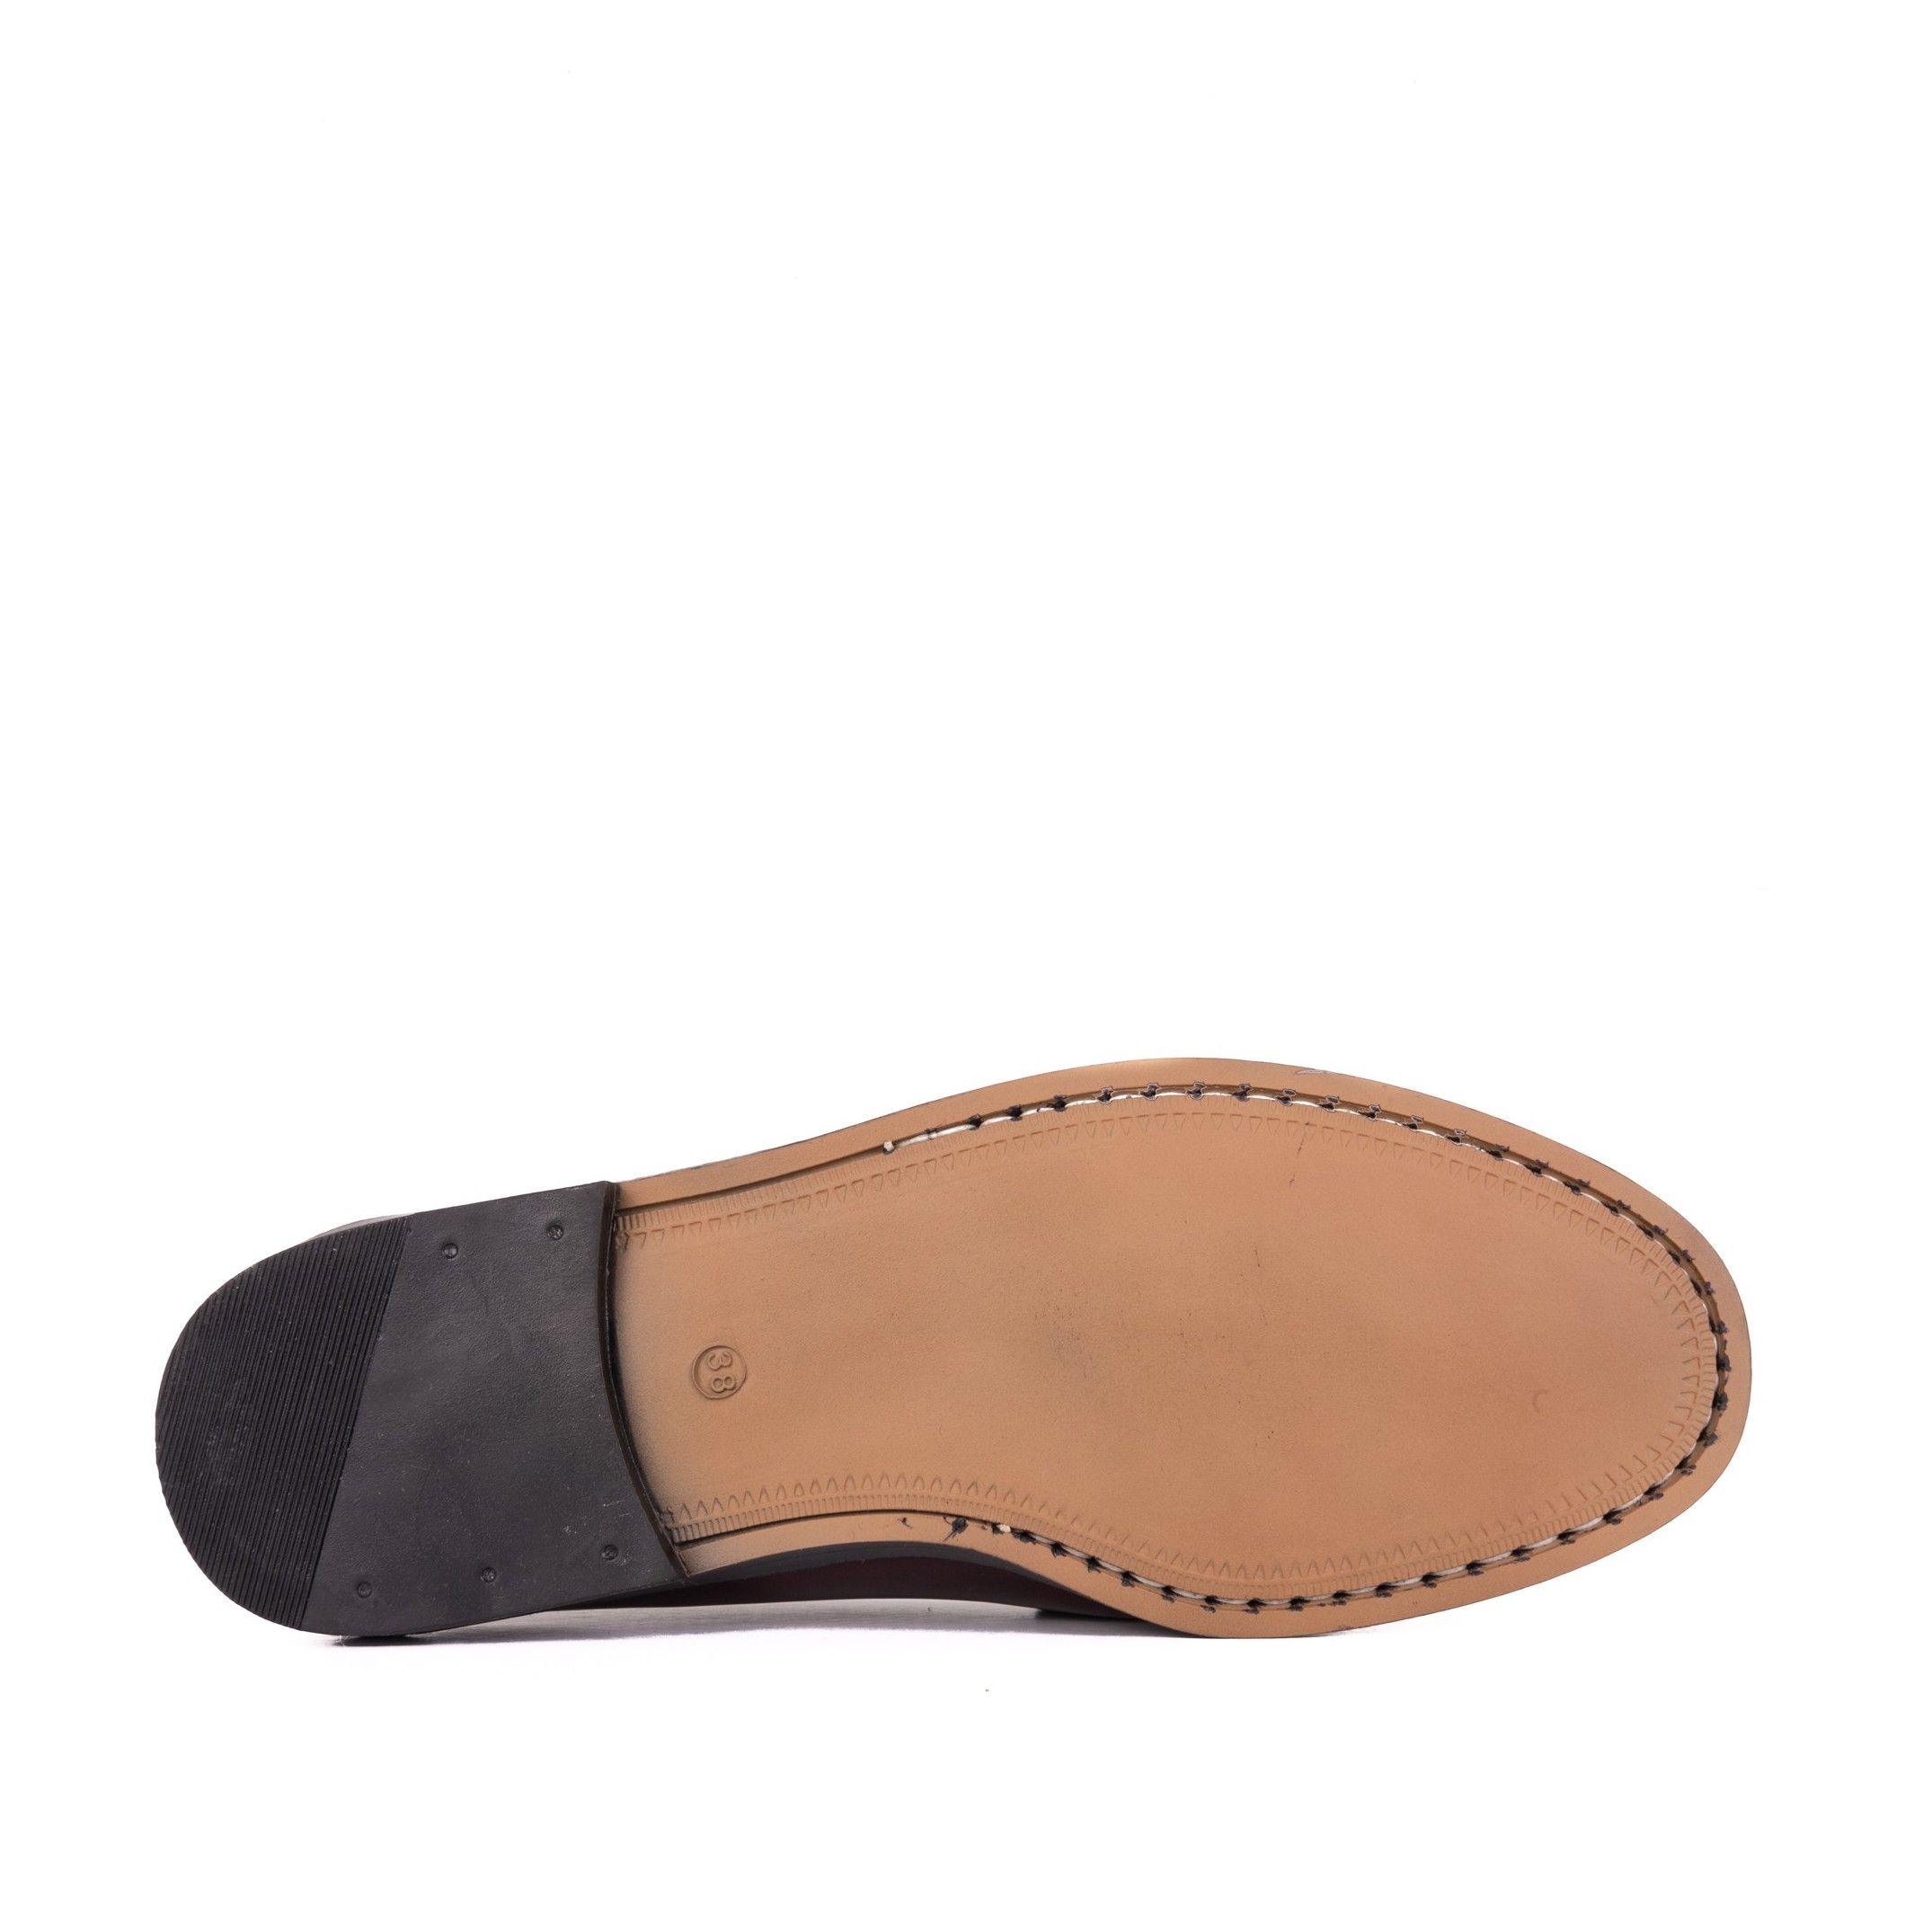 Leather loafer by Son Castellanisimos. Closure: without closure. Upper: leather. Innerr: leather. Insole: leather. Sole: non-slip. Heel: 1,5 cm. Made in Spain.